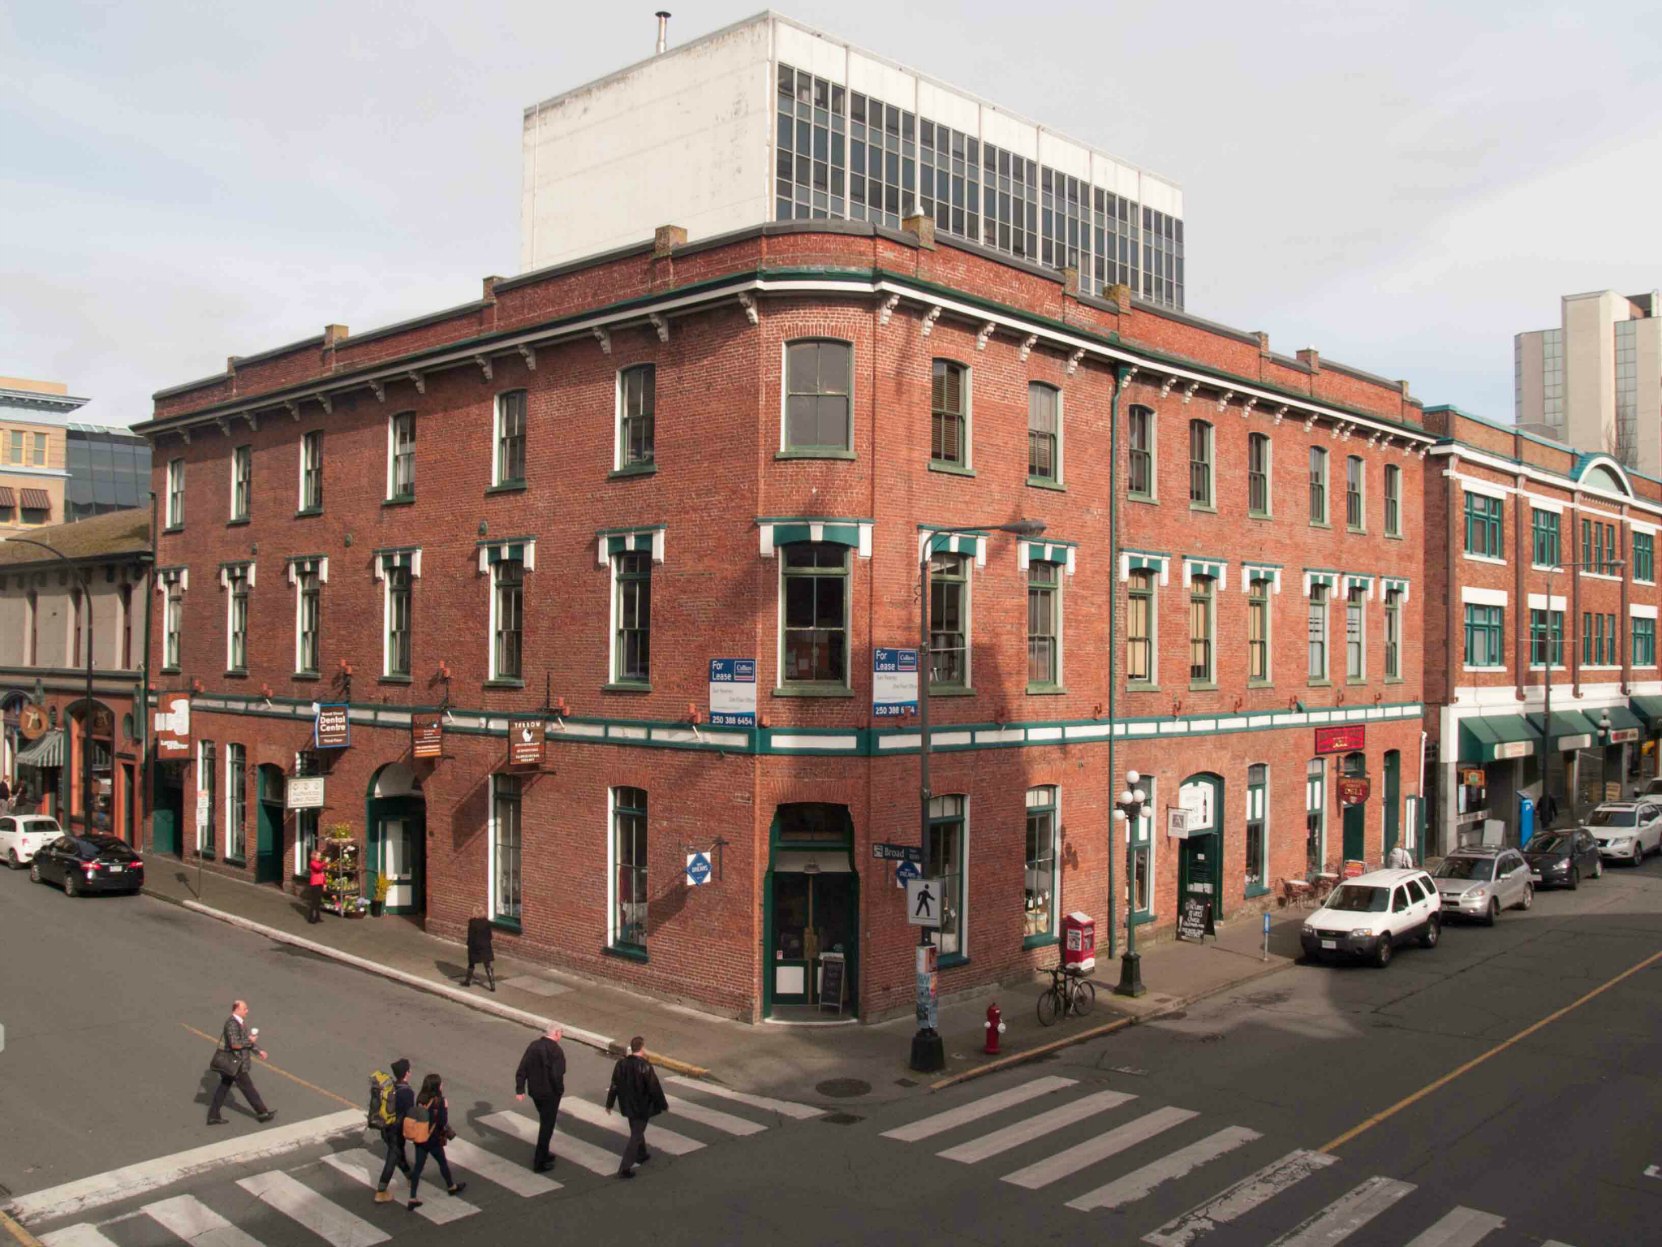 The Weiler Building at 1005-1009 Broad Street and 636 Broughton Street was built as a furniture factory and warehouse for John Weiler in 1884.